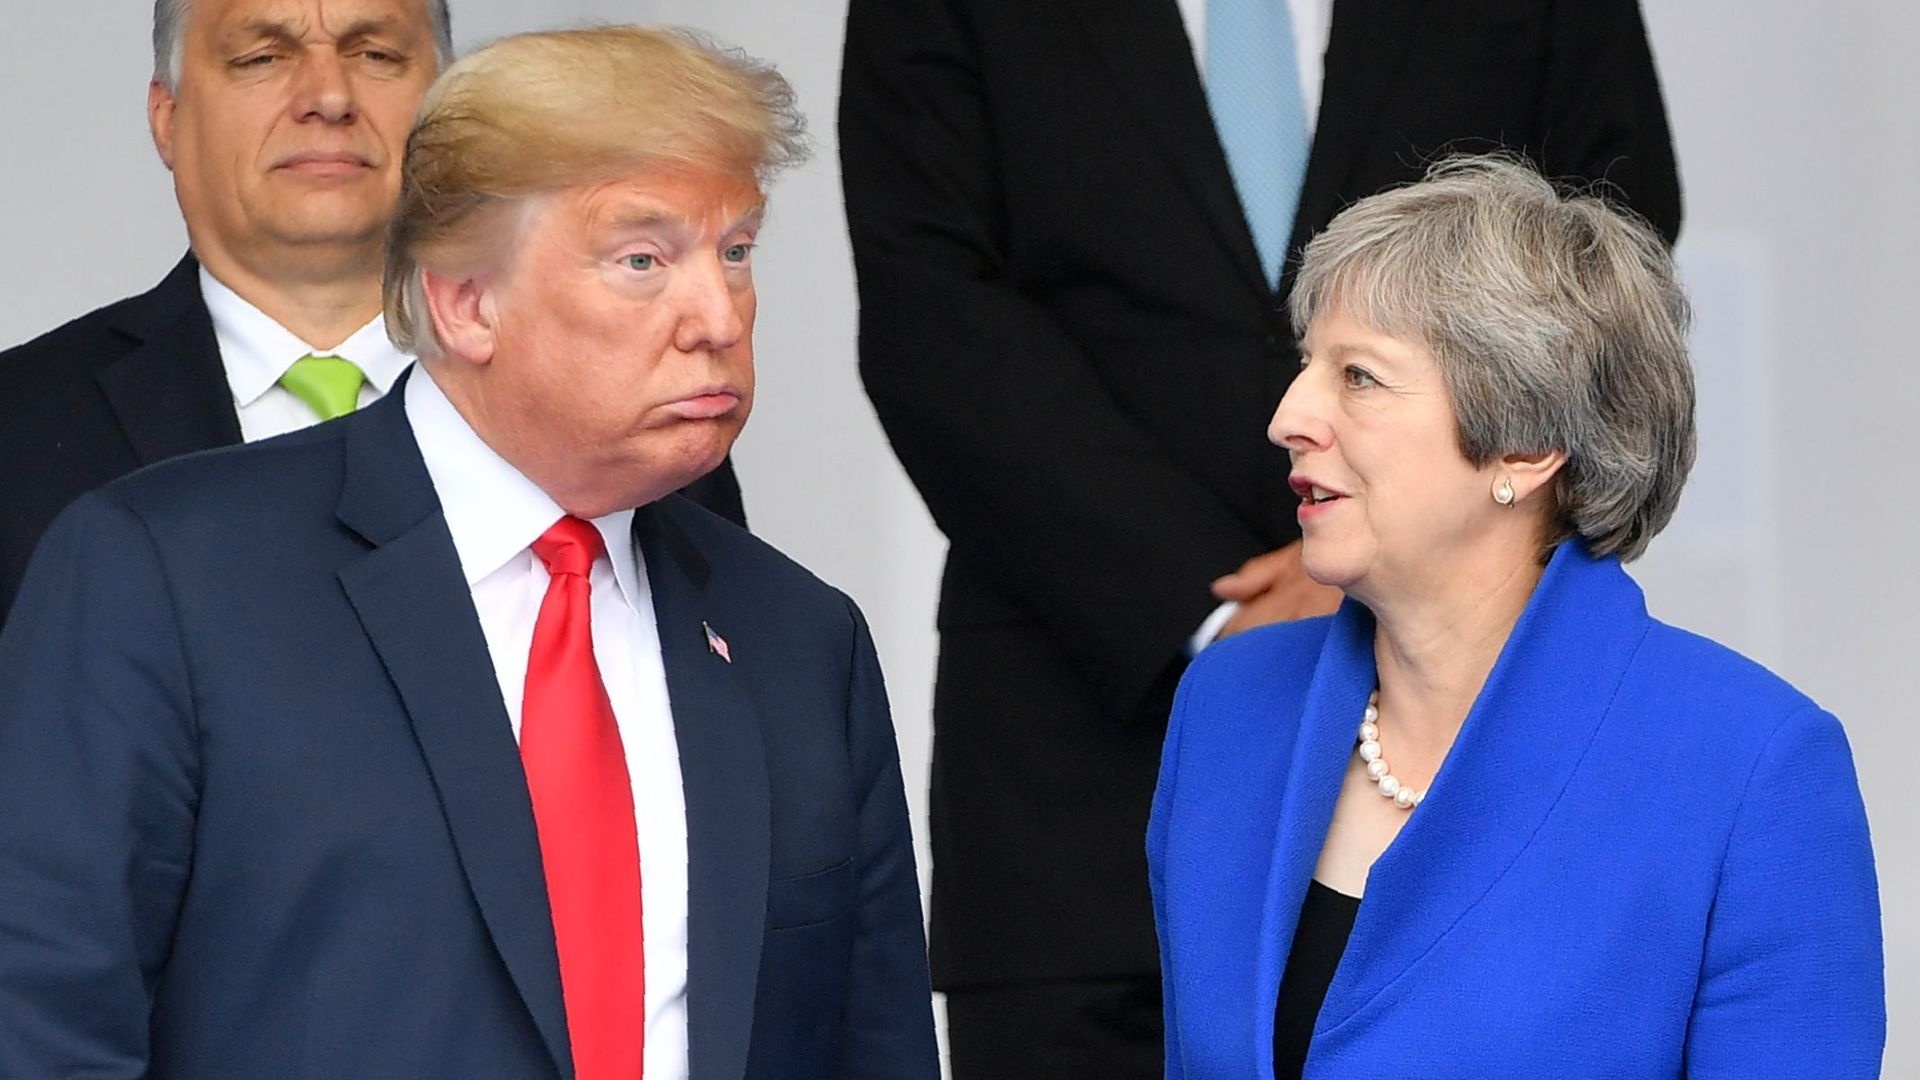  President Donald Trump (L) gestures as he poses alongside Britain's Prime Minister Theresa May (C) and Iceland's Prime Minister Katrín Jakobsdóttir (R) during the opening ceremony of the NATO summit.